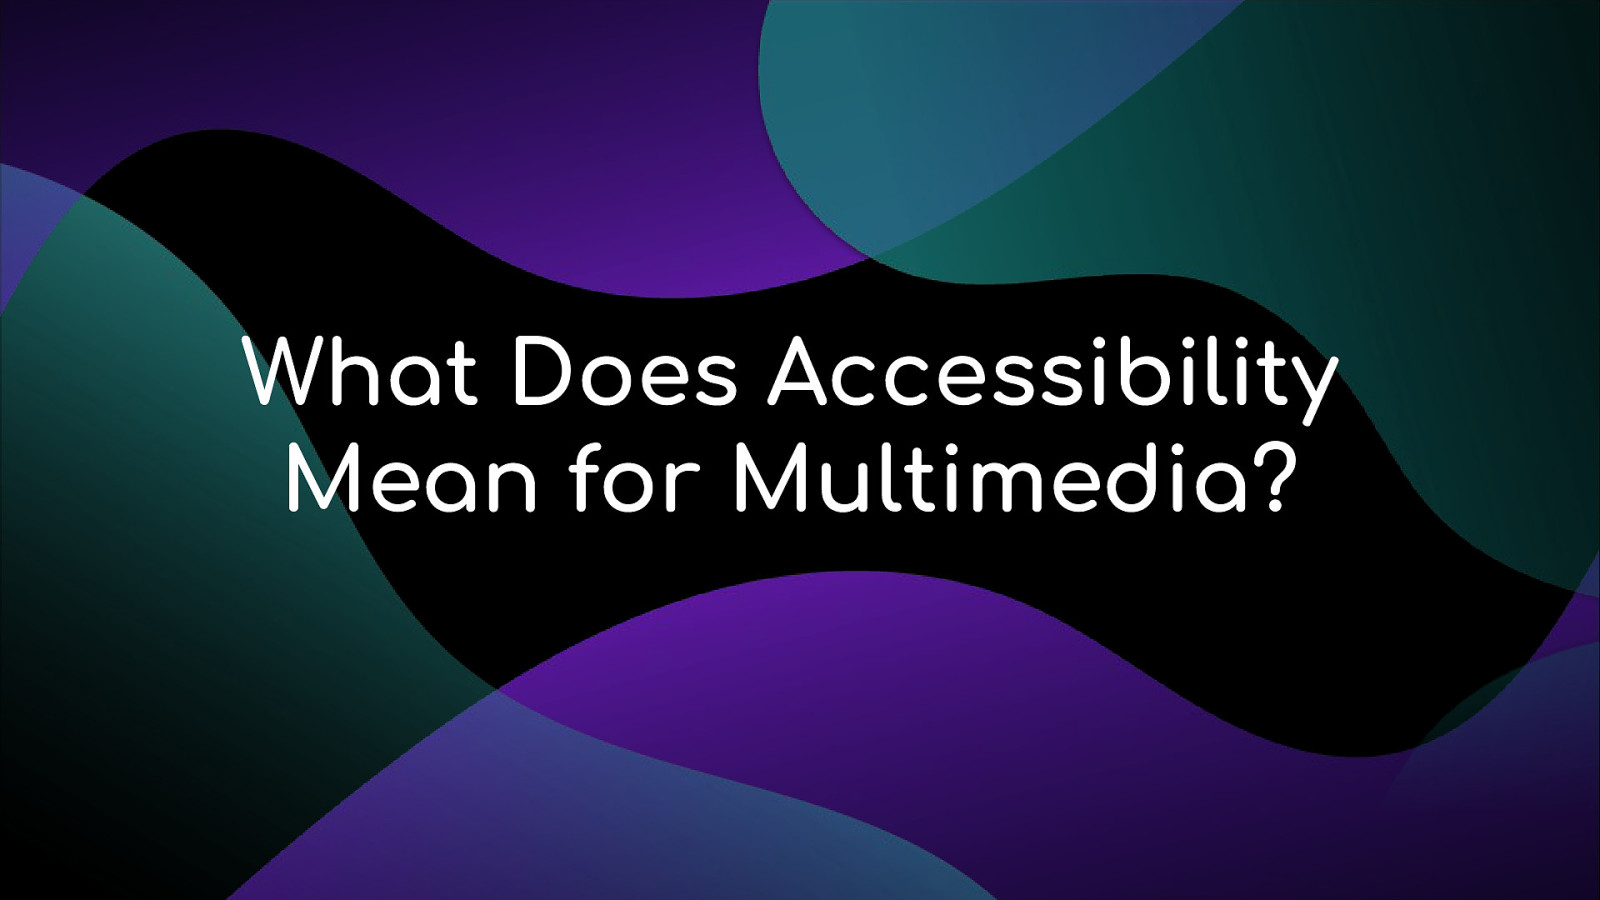 What Does Accessibility Mean for Multimedia?